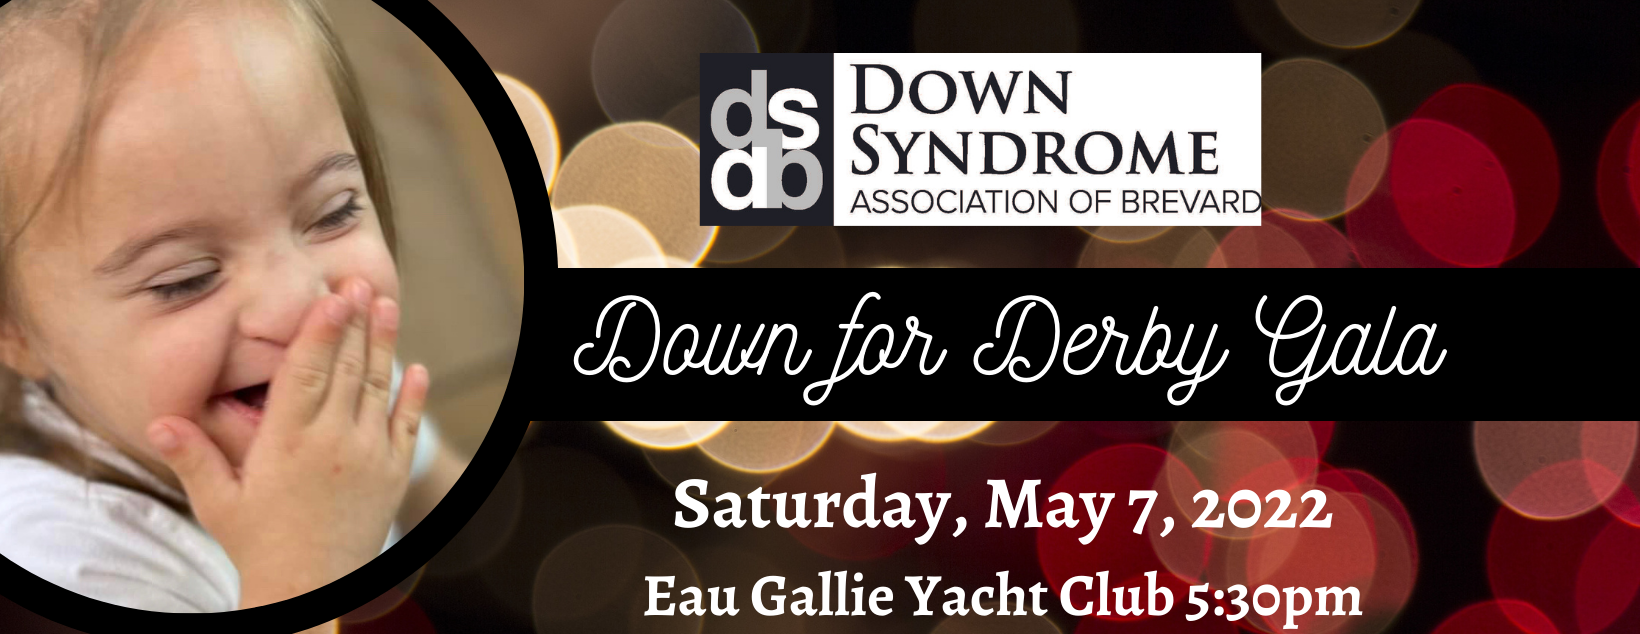 The Down Syndrome Association of Brevard